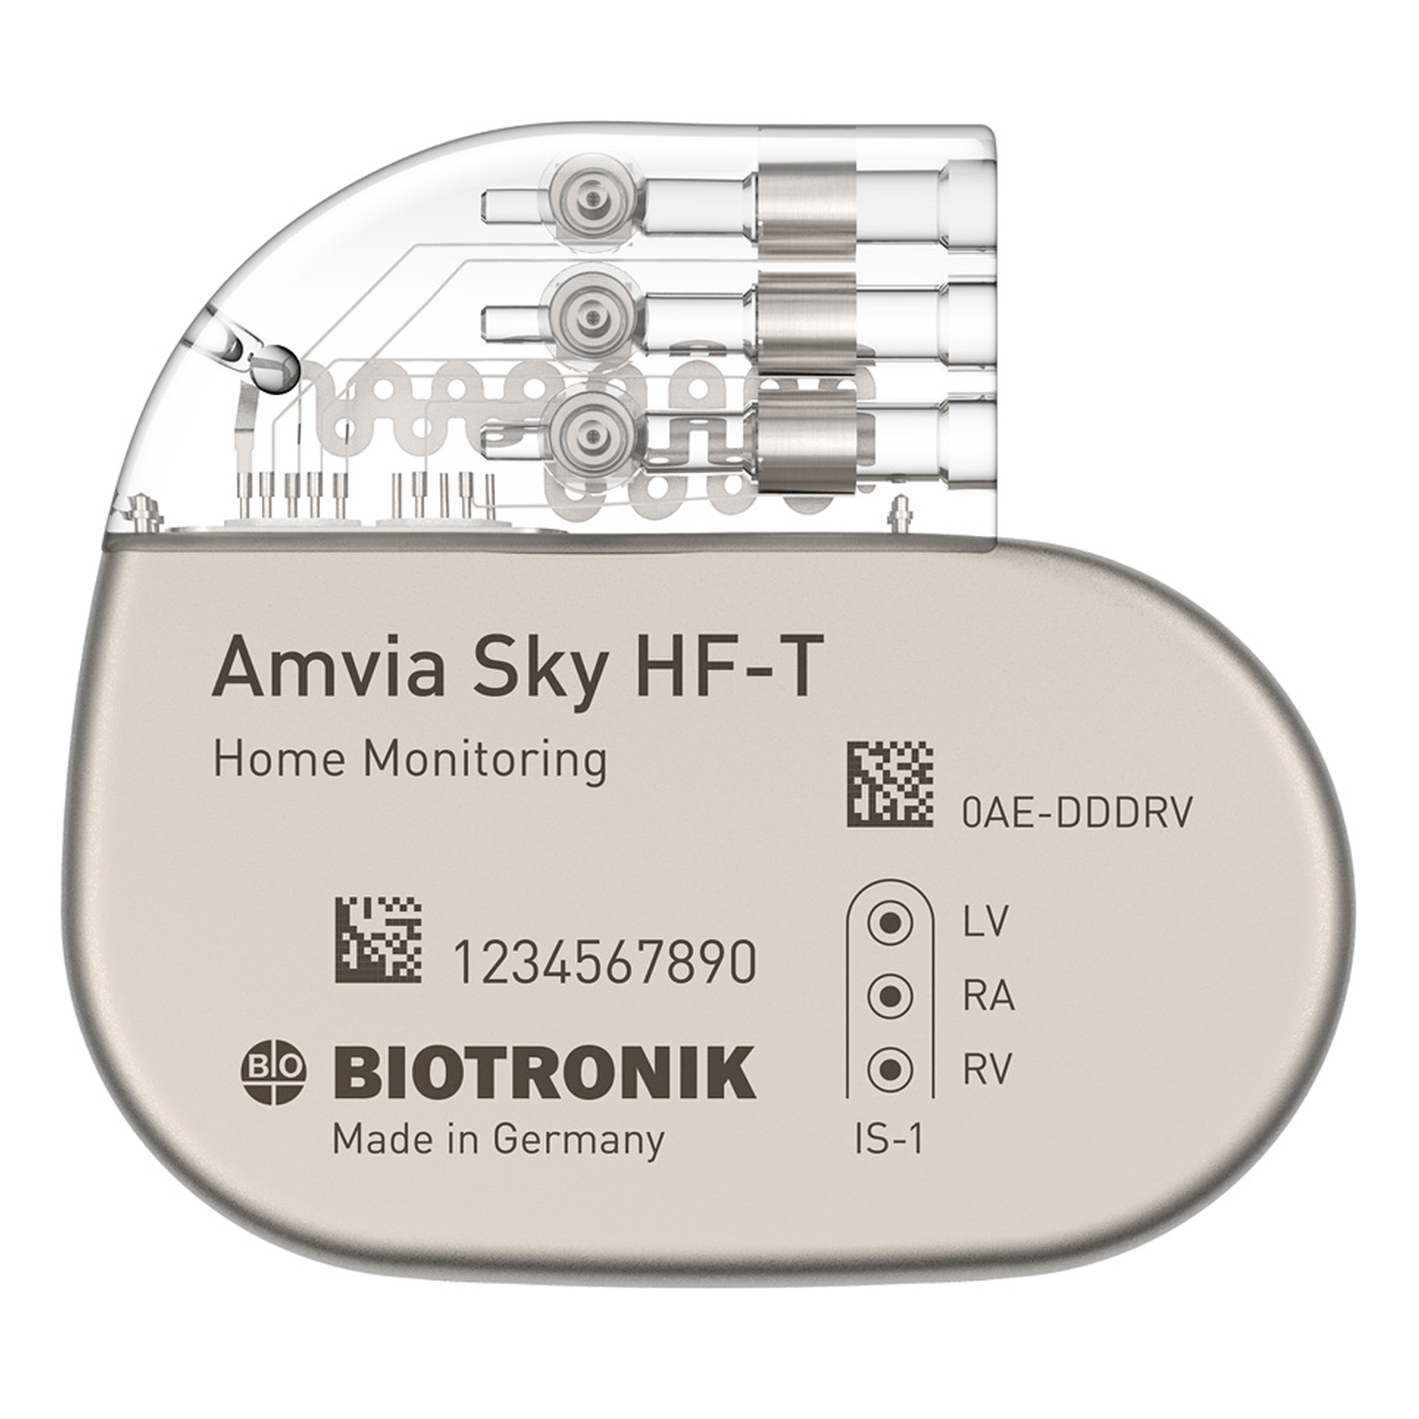 Amvia Sky HF-T CRT Pacemaker, frontal